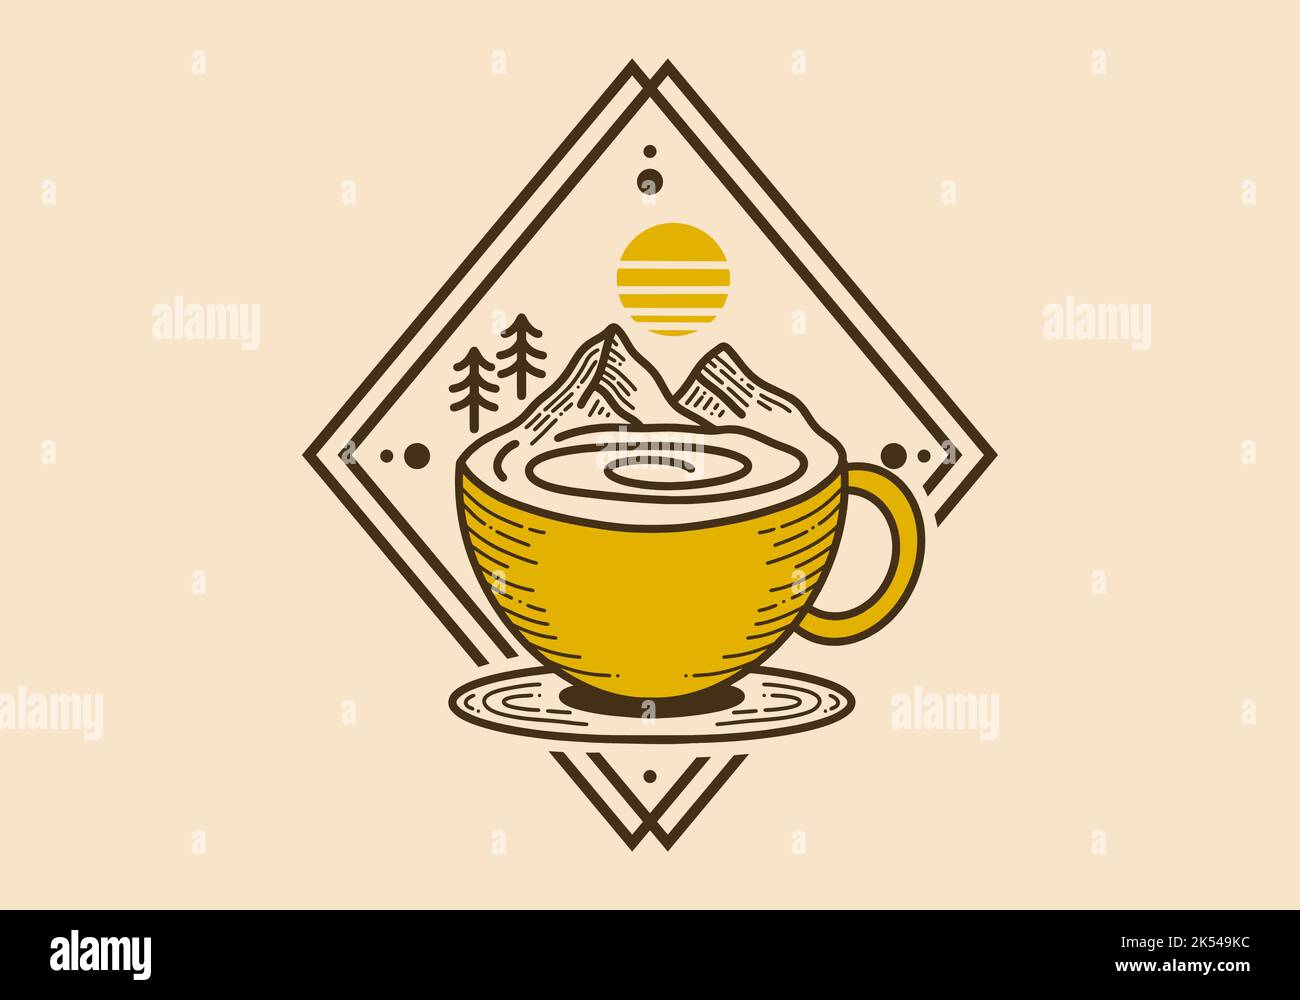 Retro style coffee cup and mountain illustration design Stock Vector